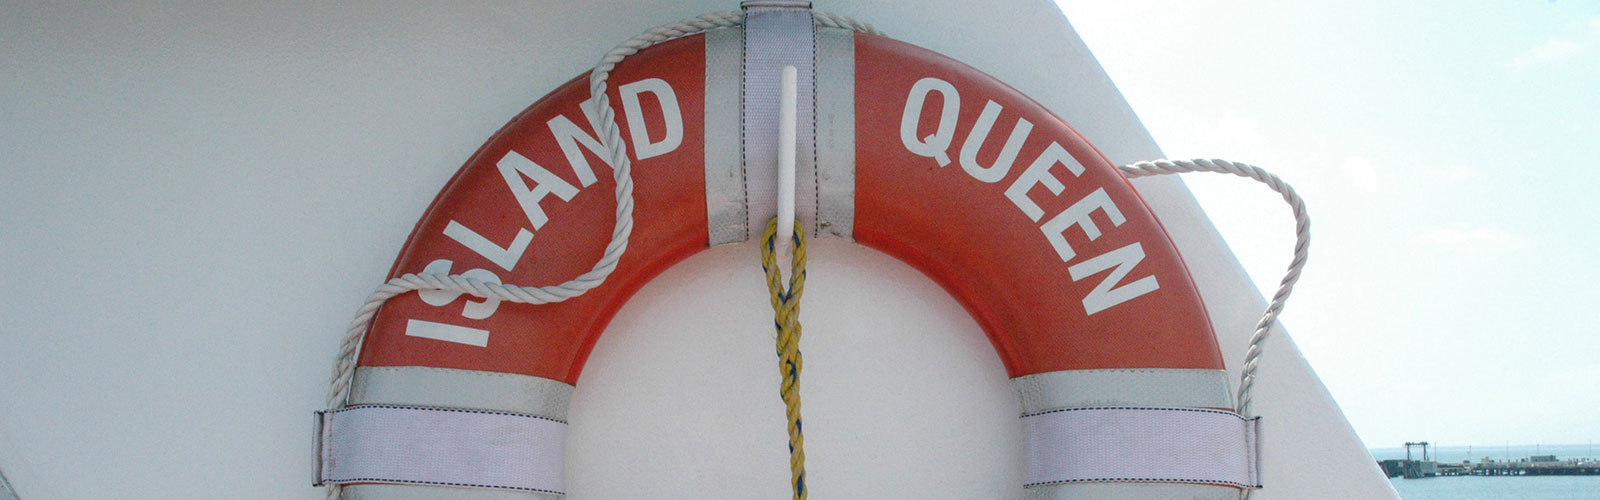 sIland Queen Ferry life ring